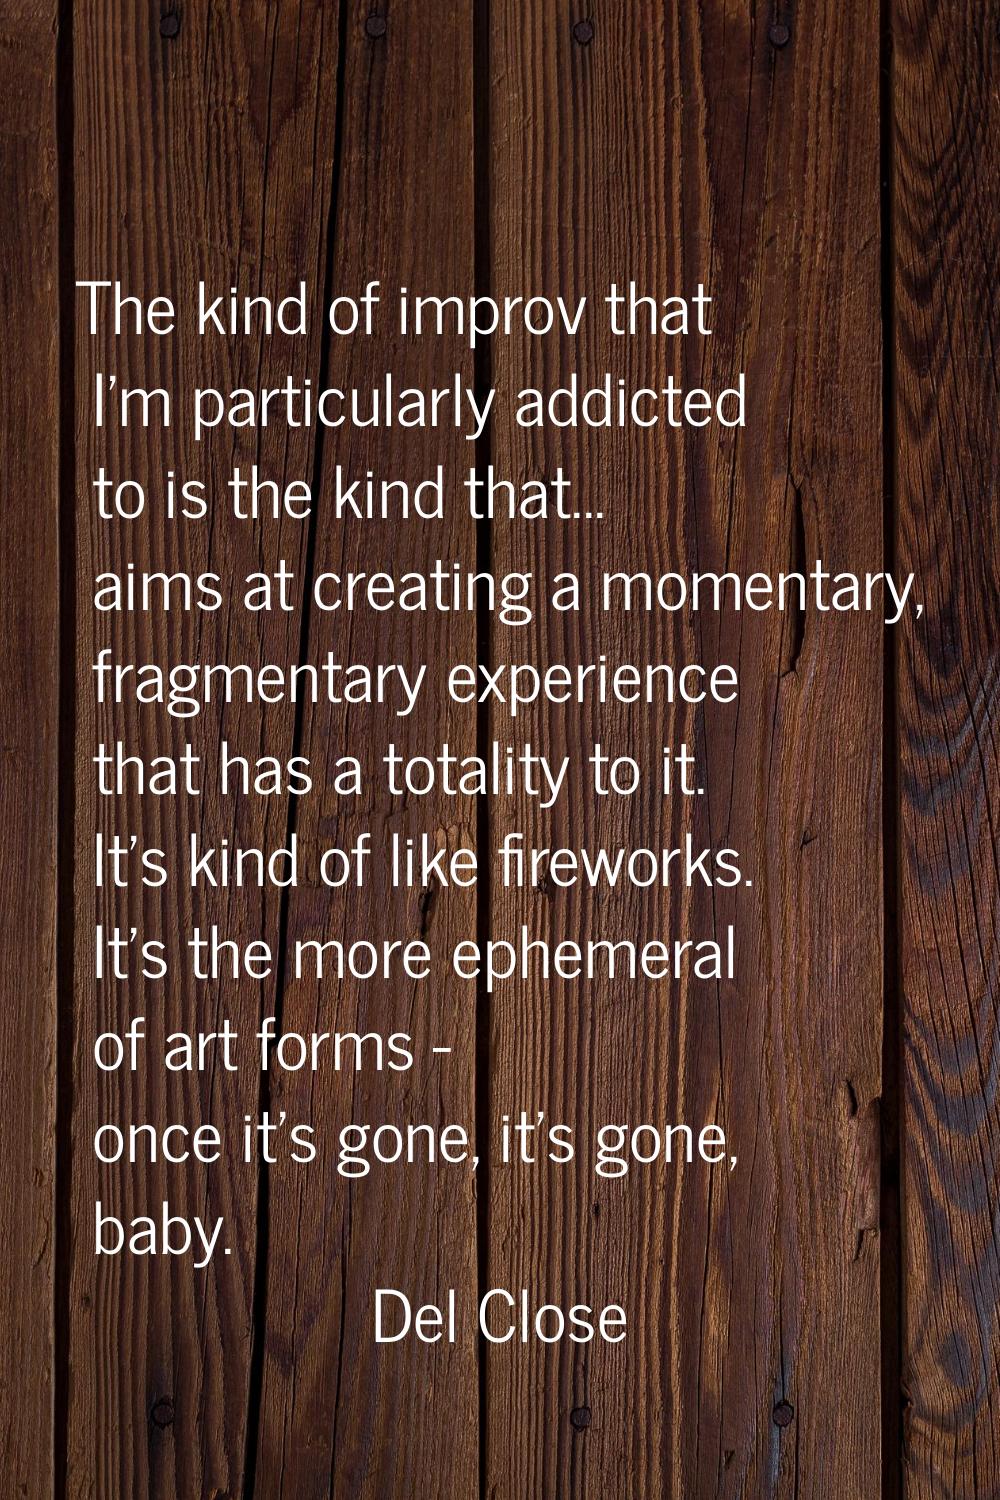 The kind of improv that I'm particularly addicted to is the kind that... aims at creating a momenta